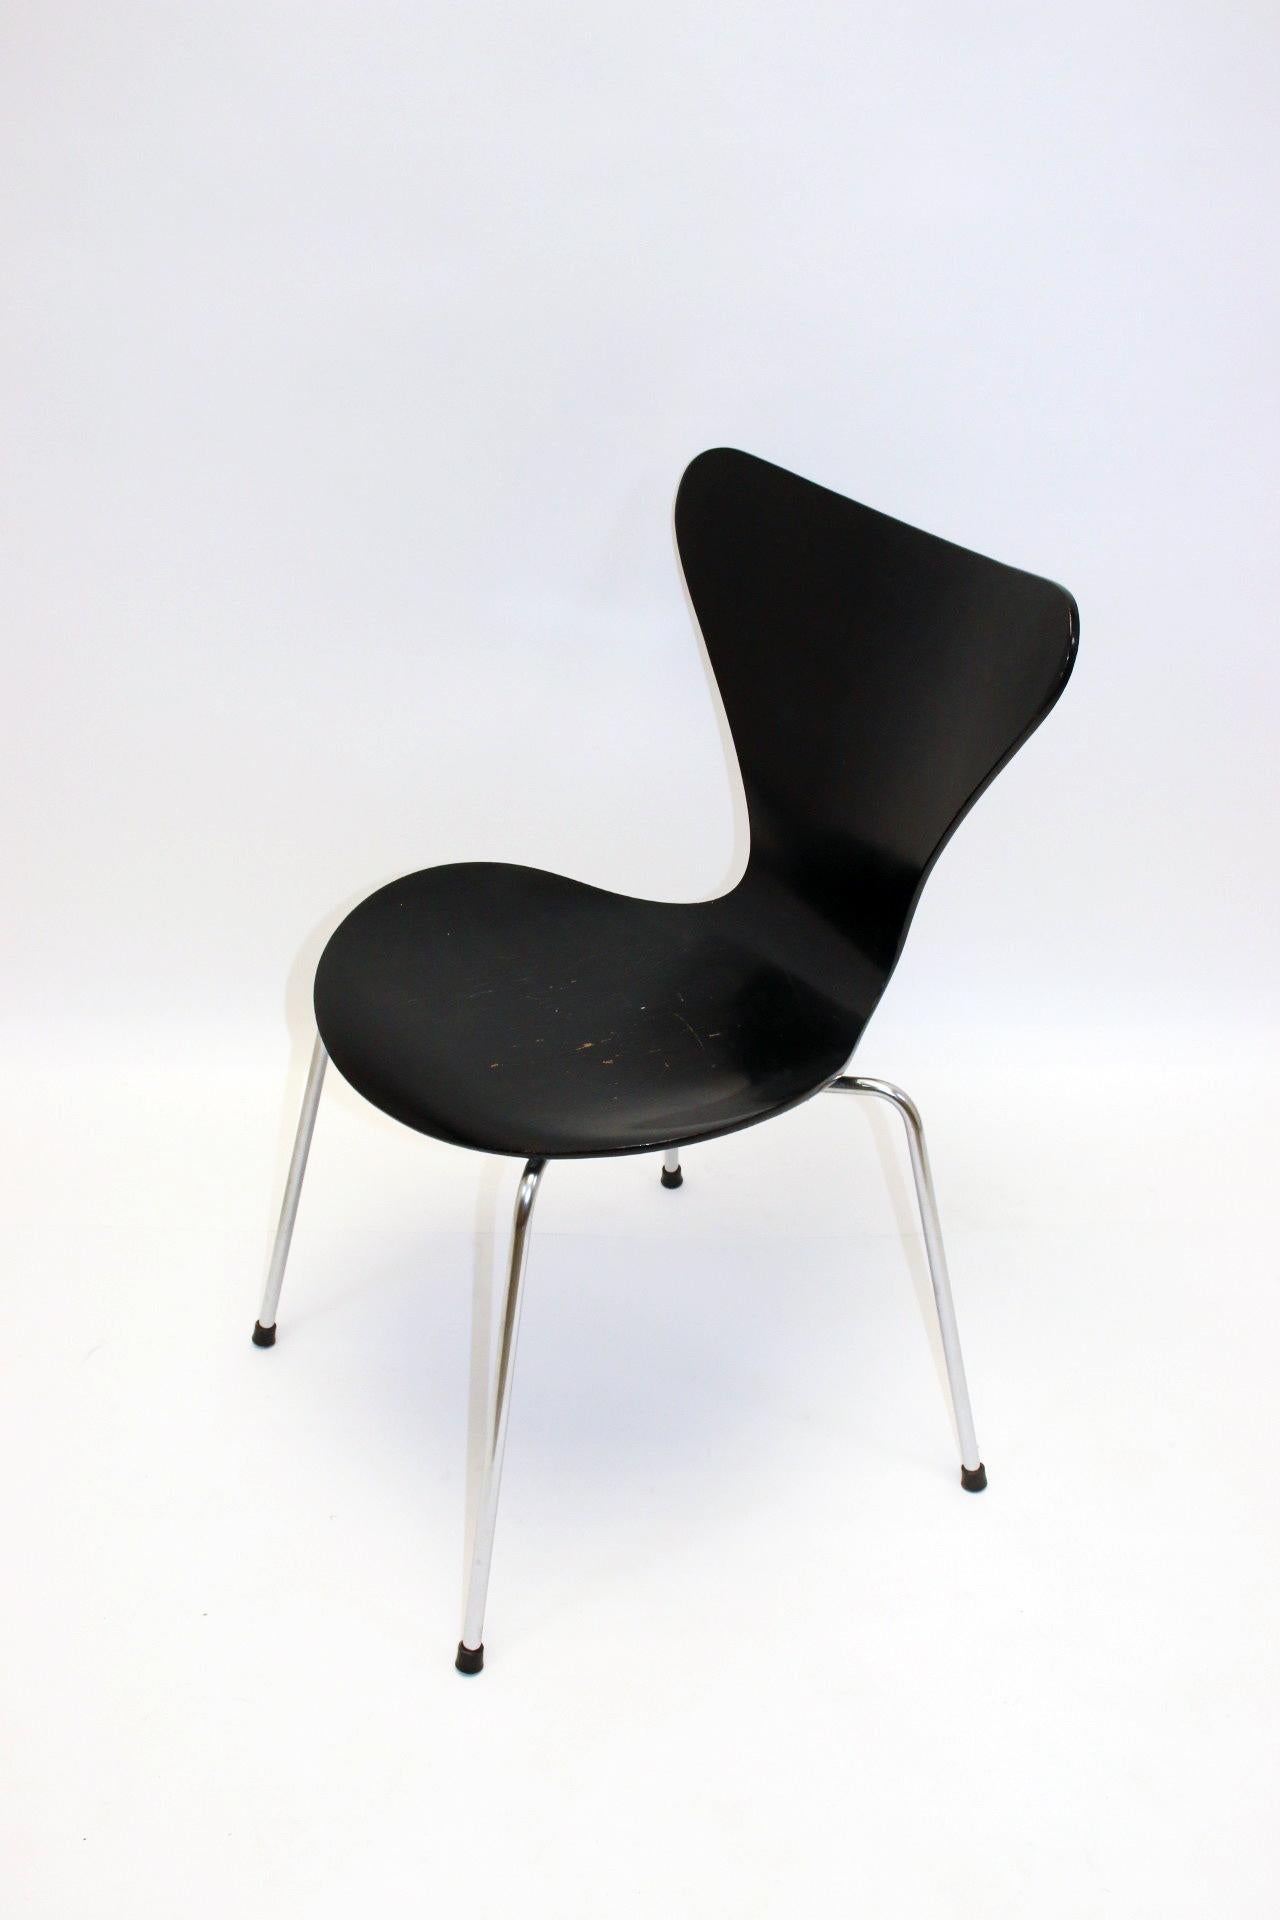 Beautiful chair of the most famous chair by Arne Jacobsen, model 3107, or the butterfly chair. This is an early chair that was released between 1955 and 1963. The original metal caps are also present at the bottom. The chair is 76 cm high, 46 cm